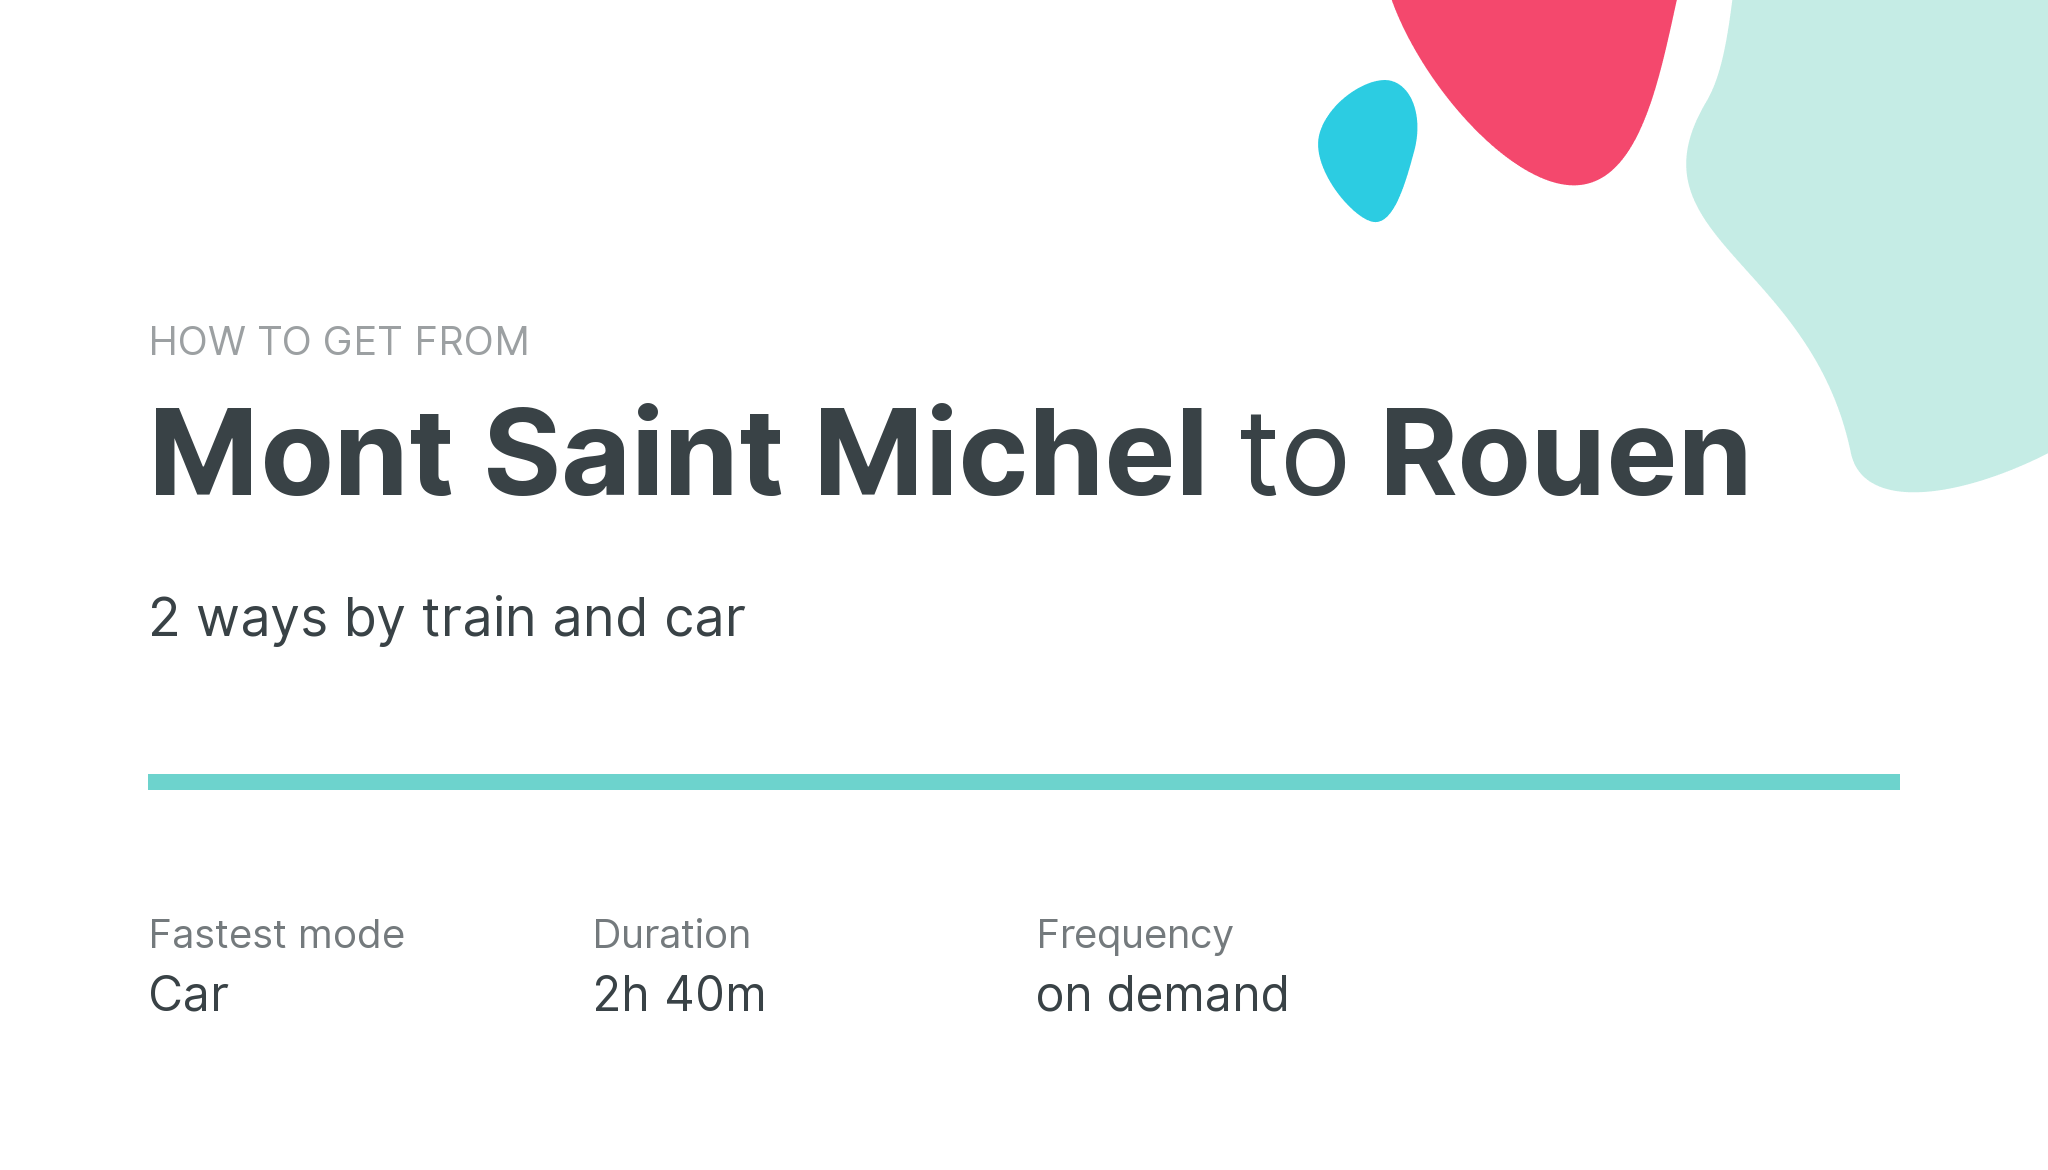 How do I get from Mont Saint Michel to Rouen